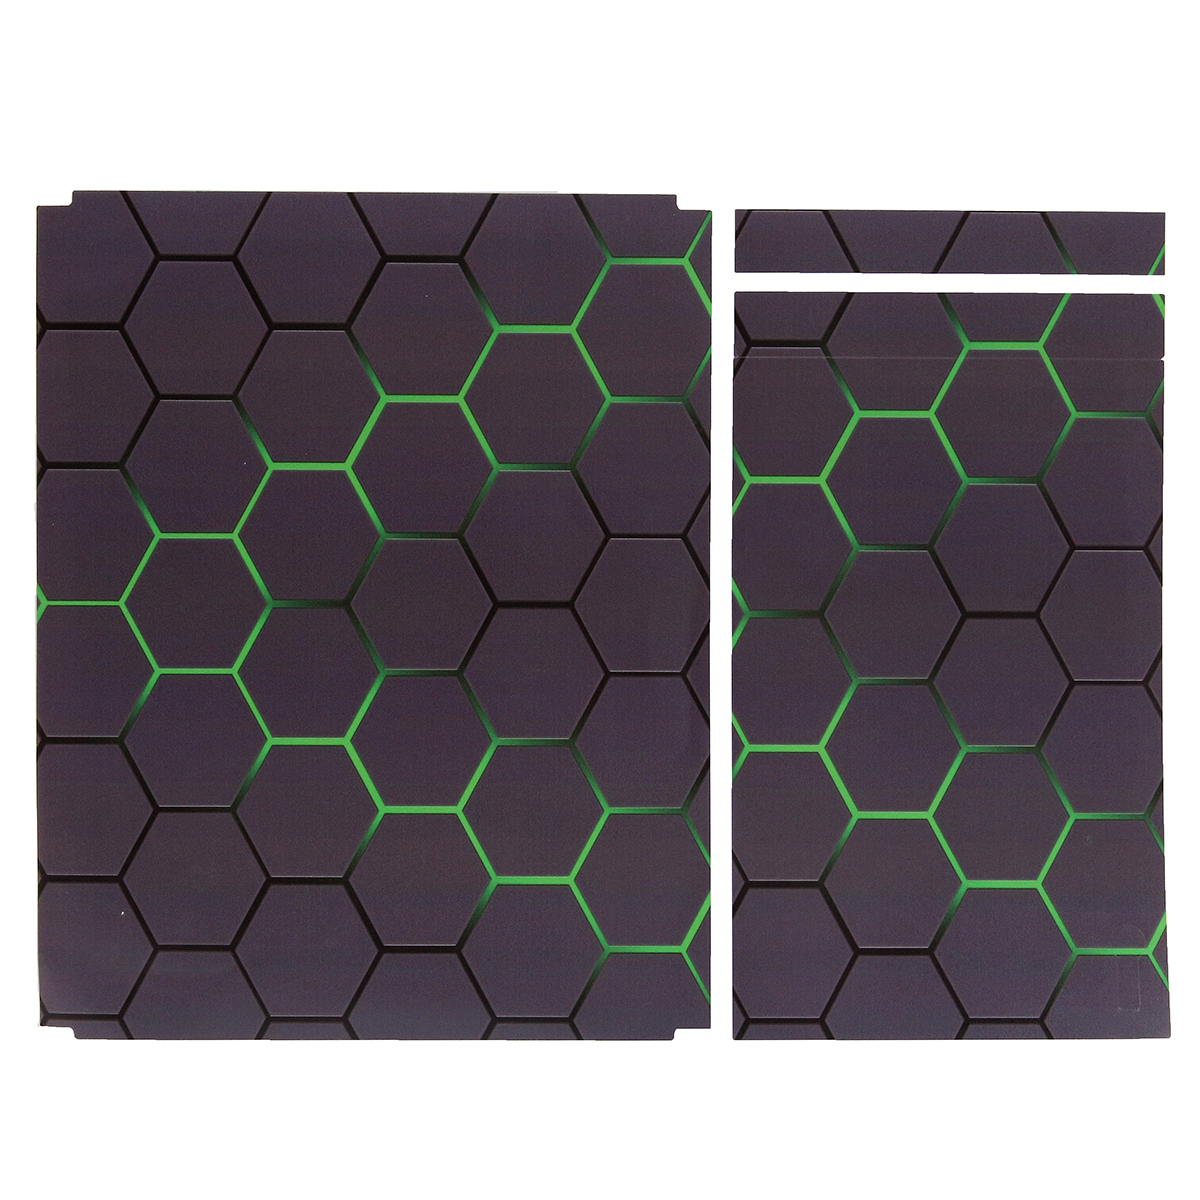 Green Grid Vinyl Decal Skin Stickers Cover for Xbox One S Game Console&2 Controllers 38